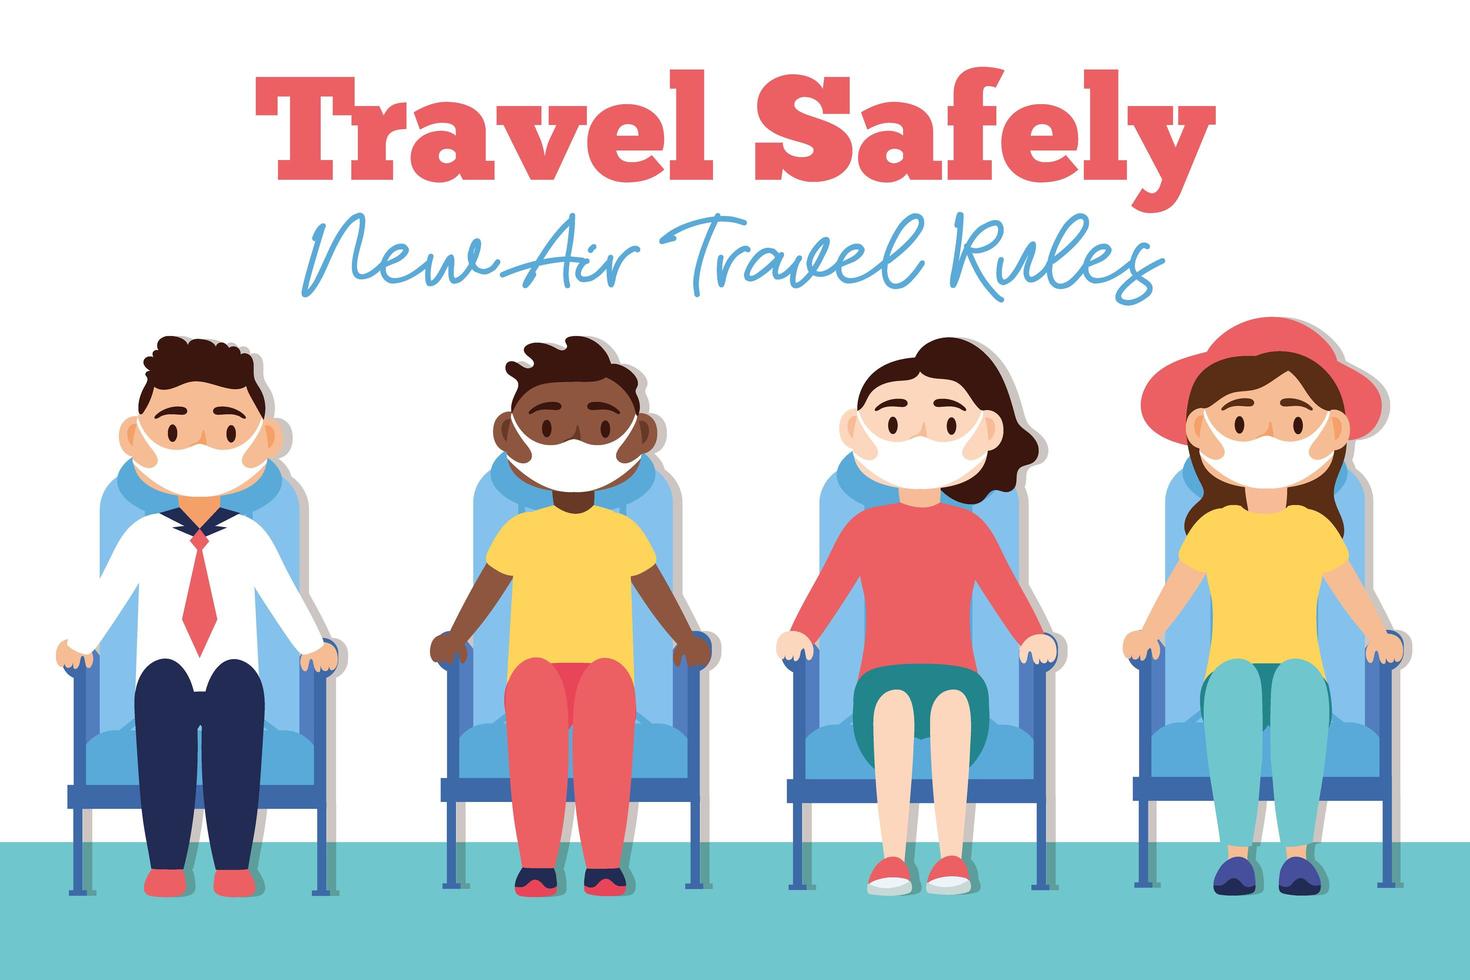 travel safely campaign lettering poster with passengers wearing medical masks in waitroom chairs vector